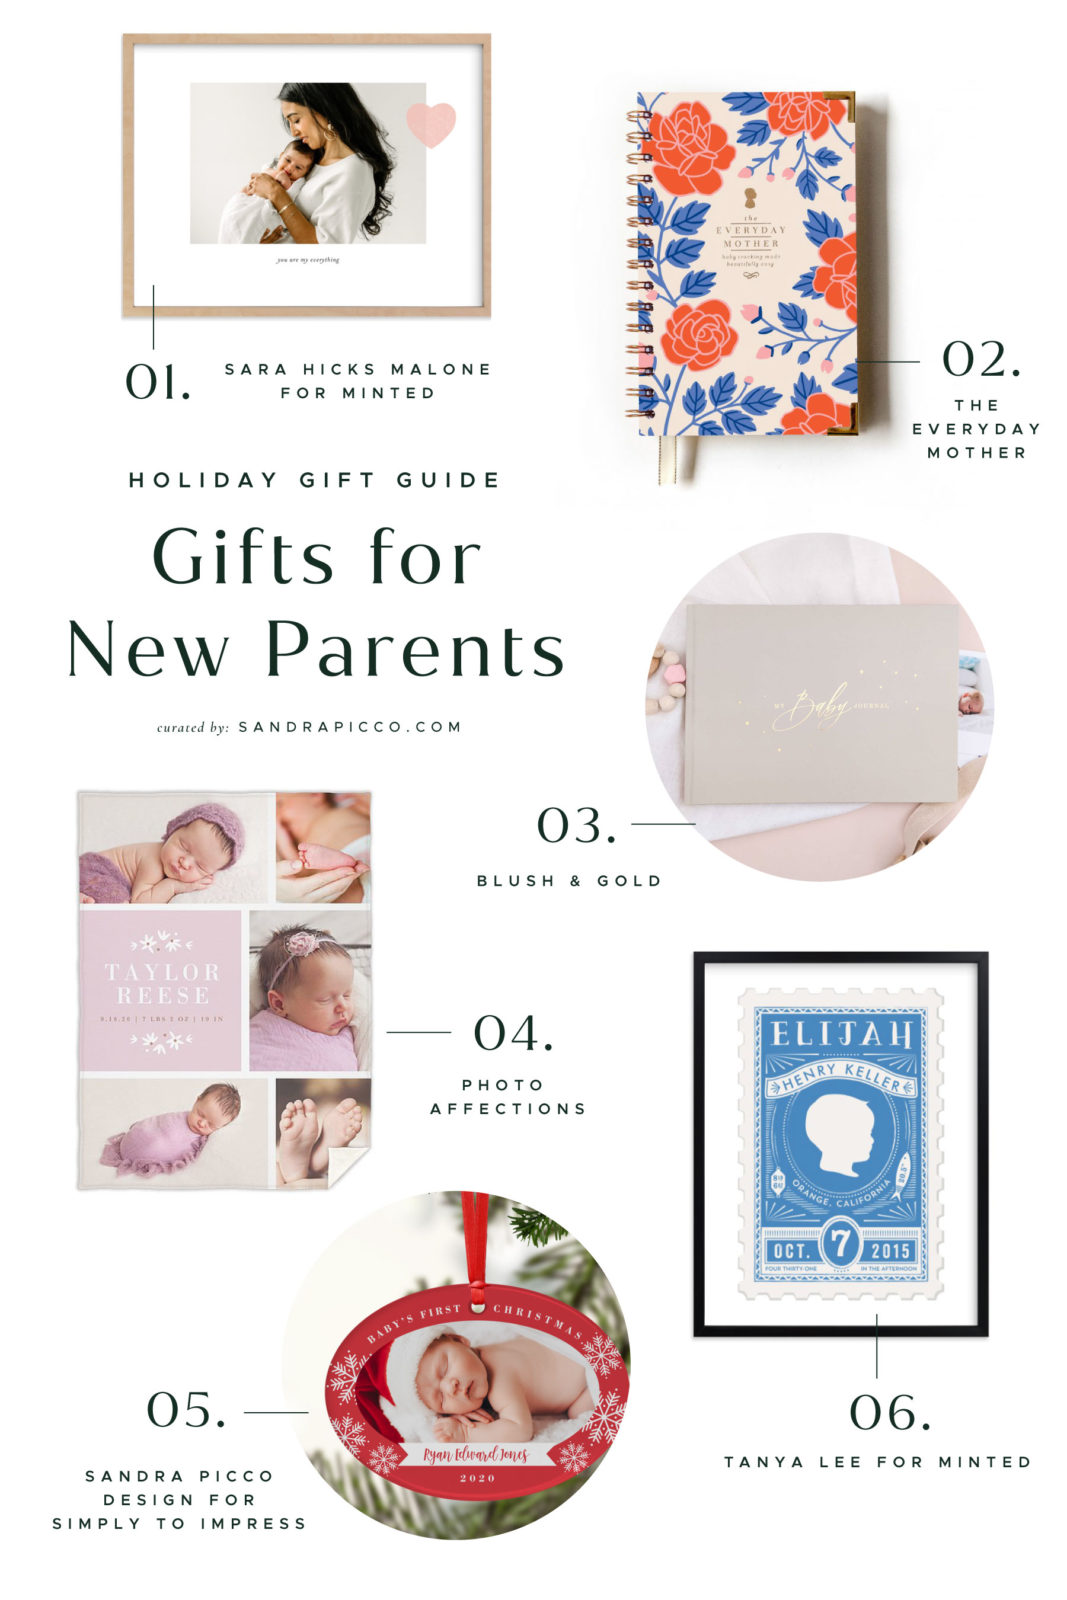 This is a holiday gift guide gifts for the new parents and babies on your list